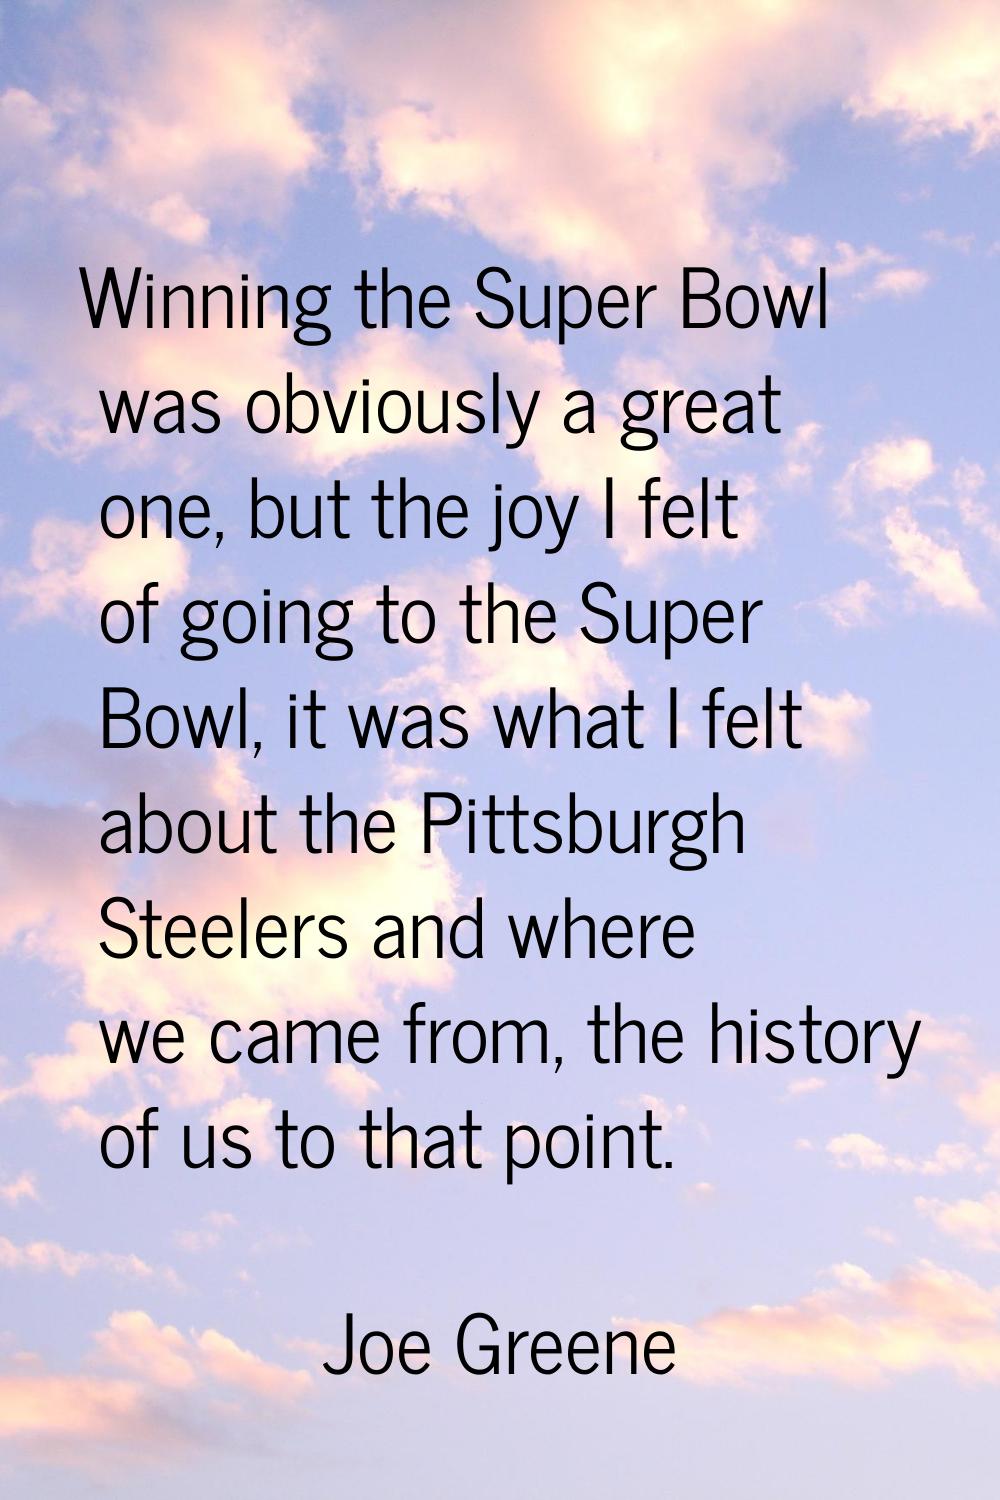 Winning the Super Bowl was obviously a great one, but the joy I felt of going to the Super Bowl, it